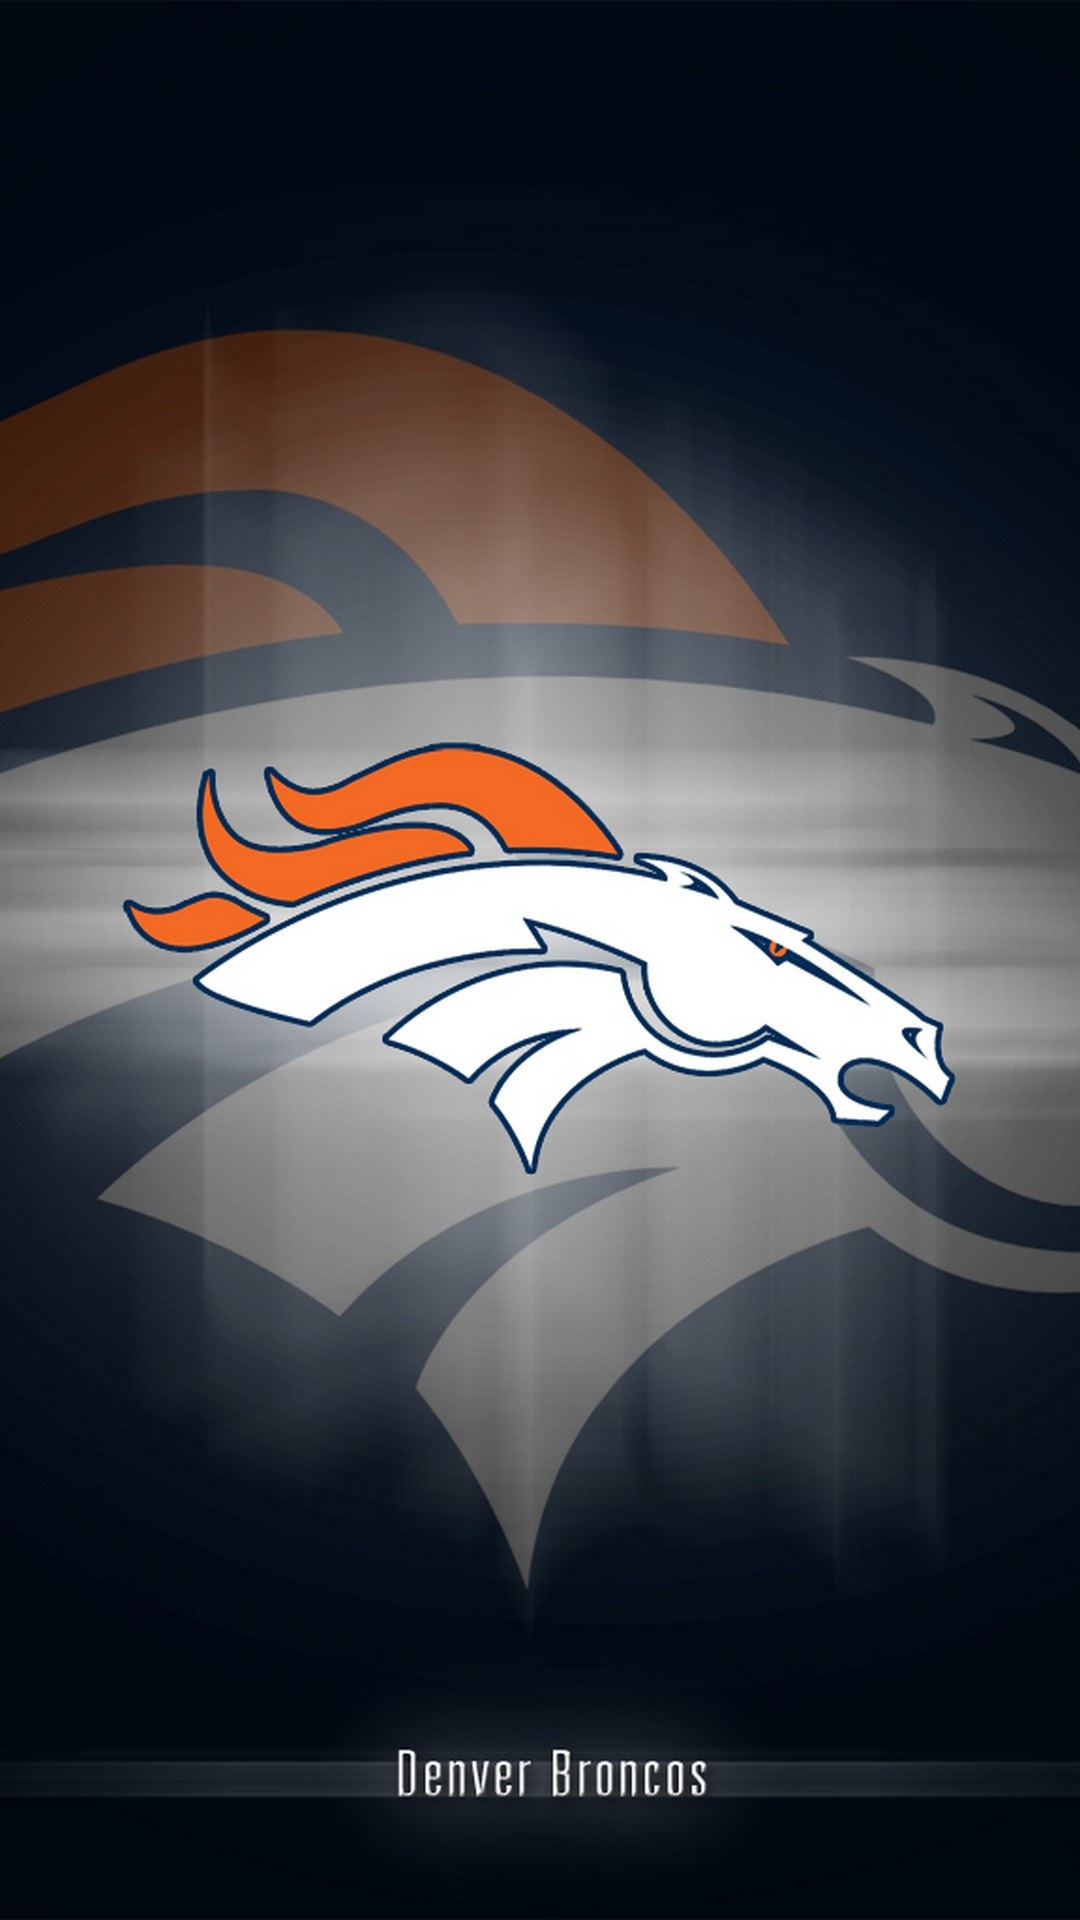 Denver Broncos iPhone Wallpaper High Quality With high-resolution 1080X1920 pixel. Donwload and set as wallpaper for your iPhone X, iPhone XS home screen backgrounds, XS Max, XR, iPhone8 lock screen wallpaper, iPhone 7, 6, SE, and other mobile devices